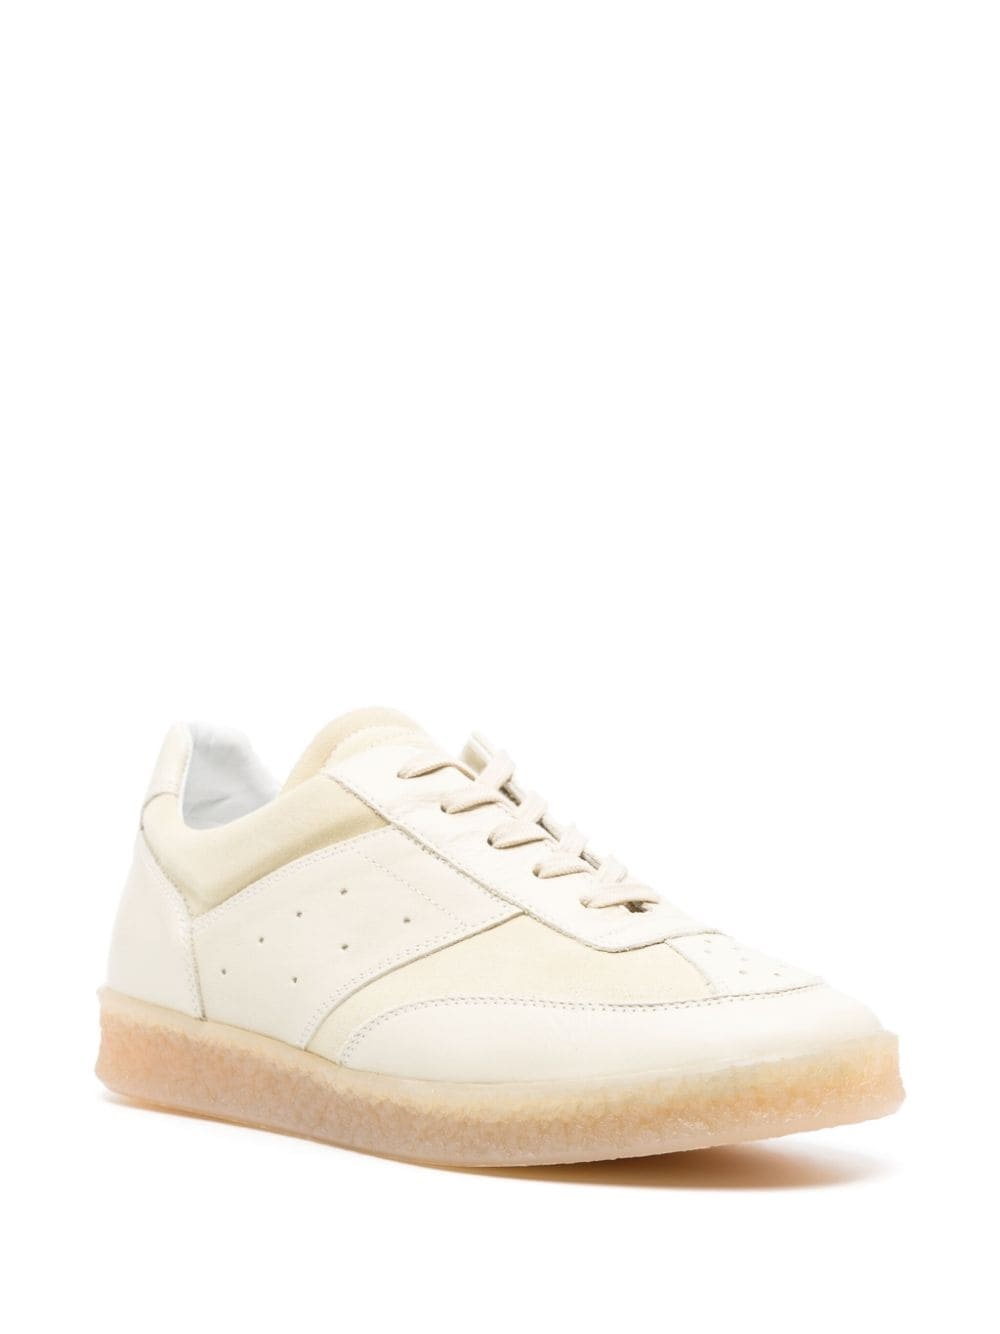 Replica panelled leather sneakers - 2